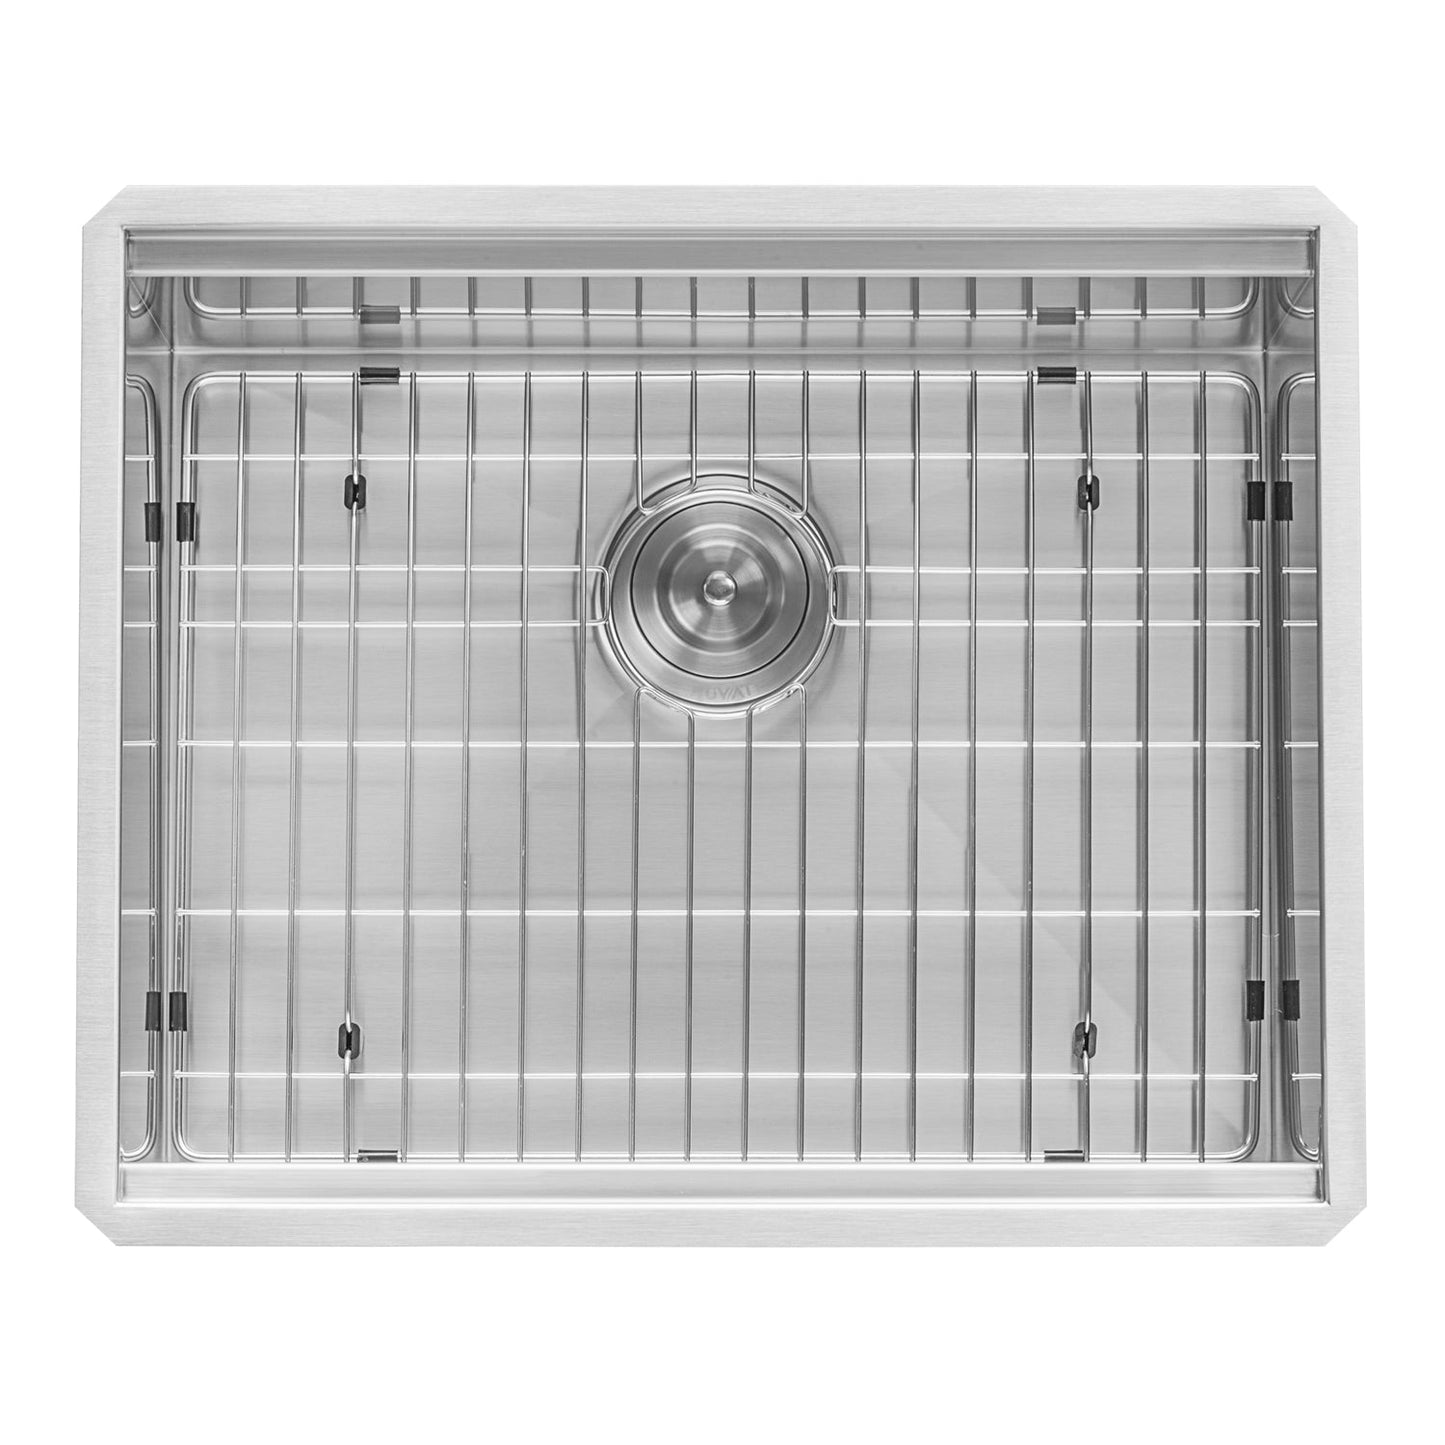 Ruvati Roma 21" x 19" Undermount Stainless Steel Single Bowl Bar Prep Workstation Sink With Bottom Rinse Grid and Drain Assembly